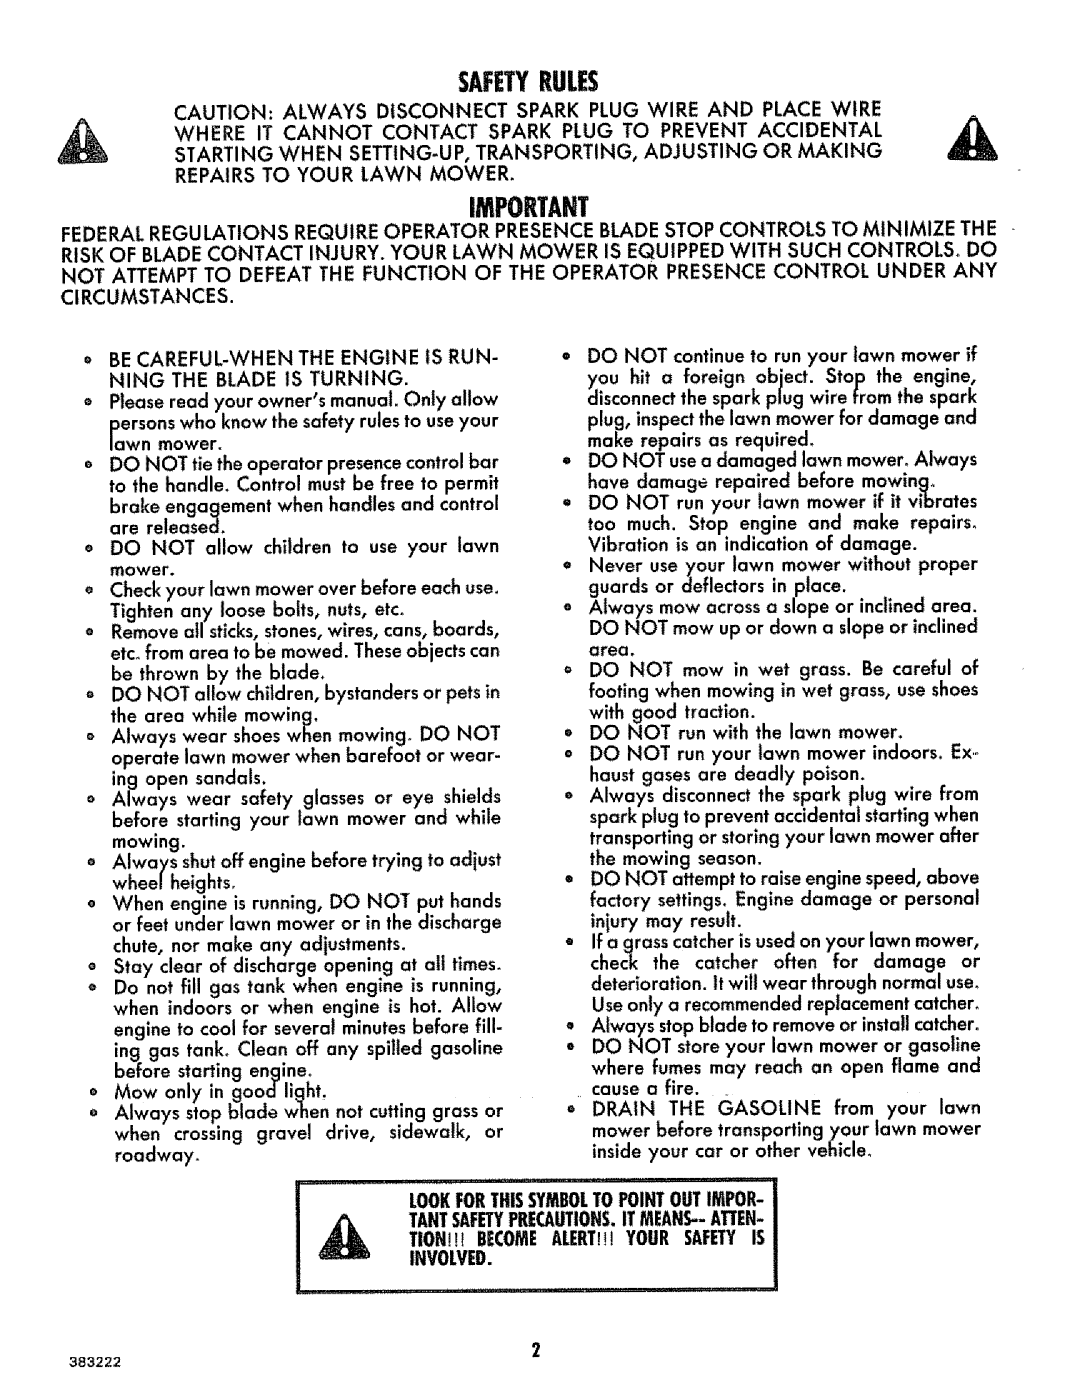 Sears 917.383223 manual Safetyrules, R+Ingwhen T Anspor+,Ngad+Us+,Ng +Oyourlawnmower 